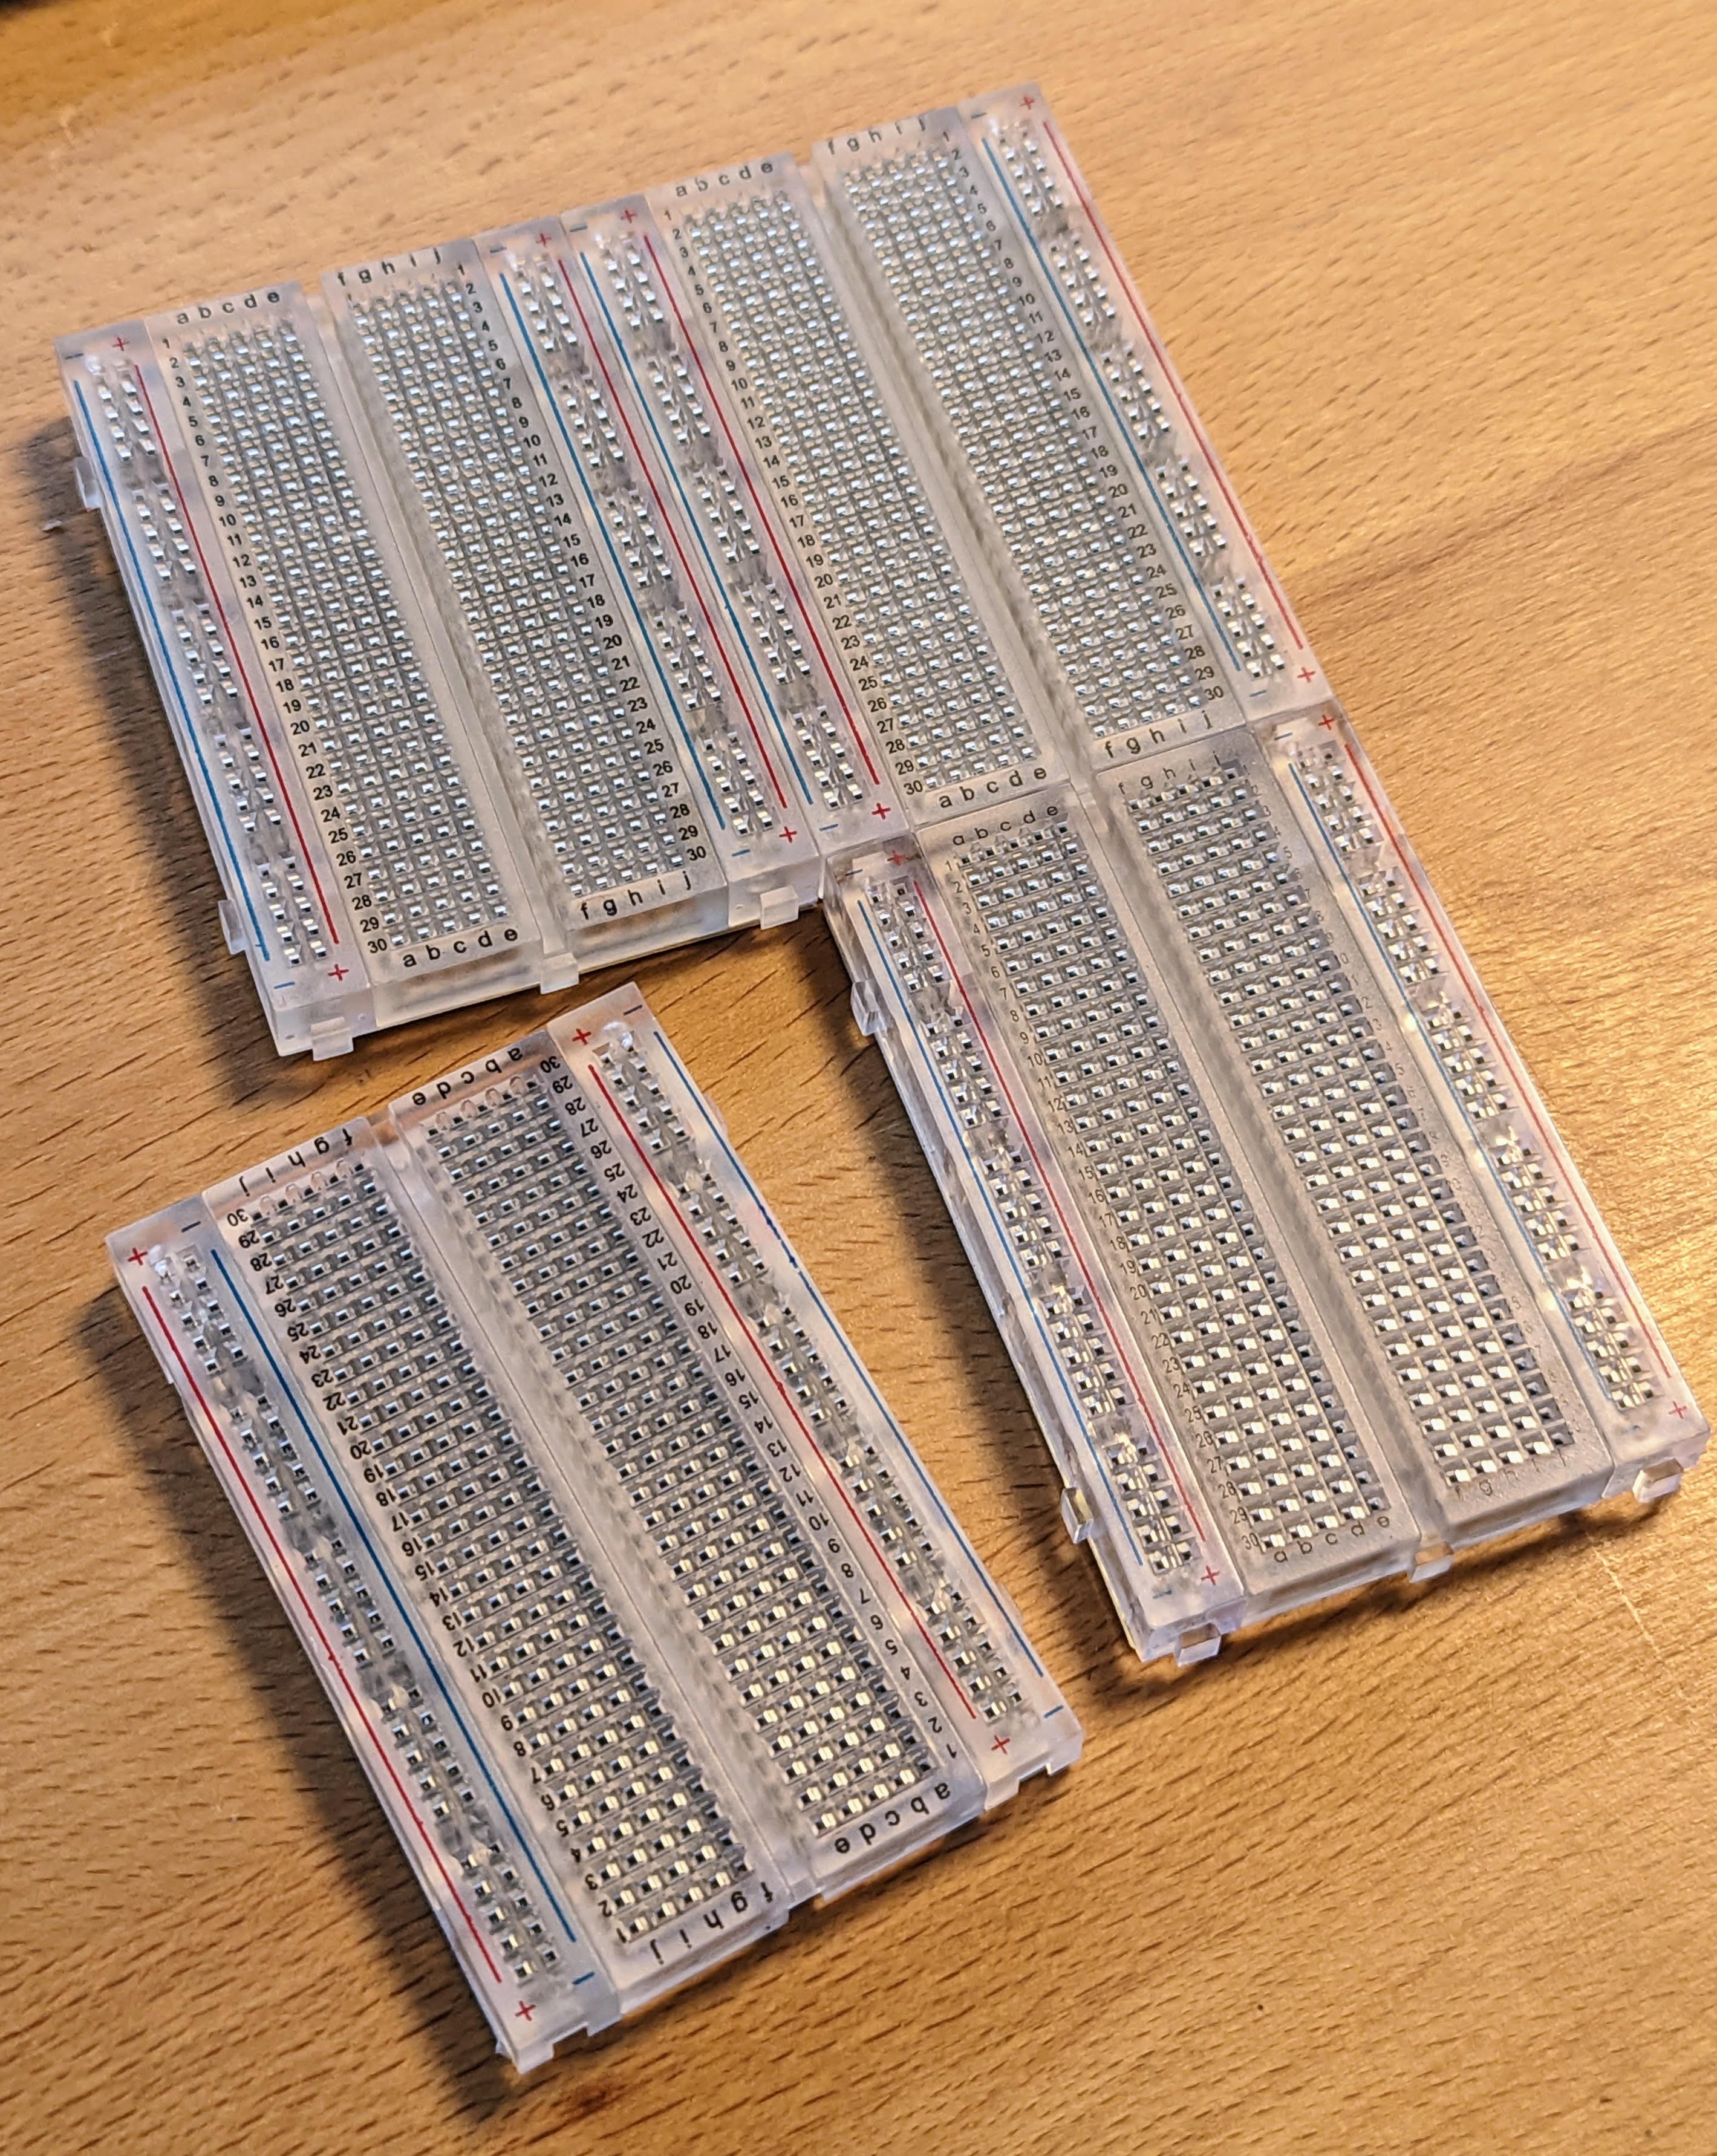 Breadboard with 400 connections - Your experimental board for your own circuits